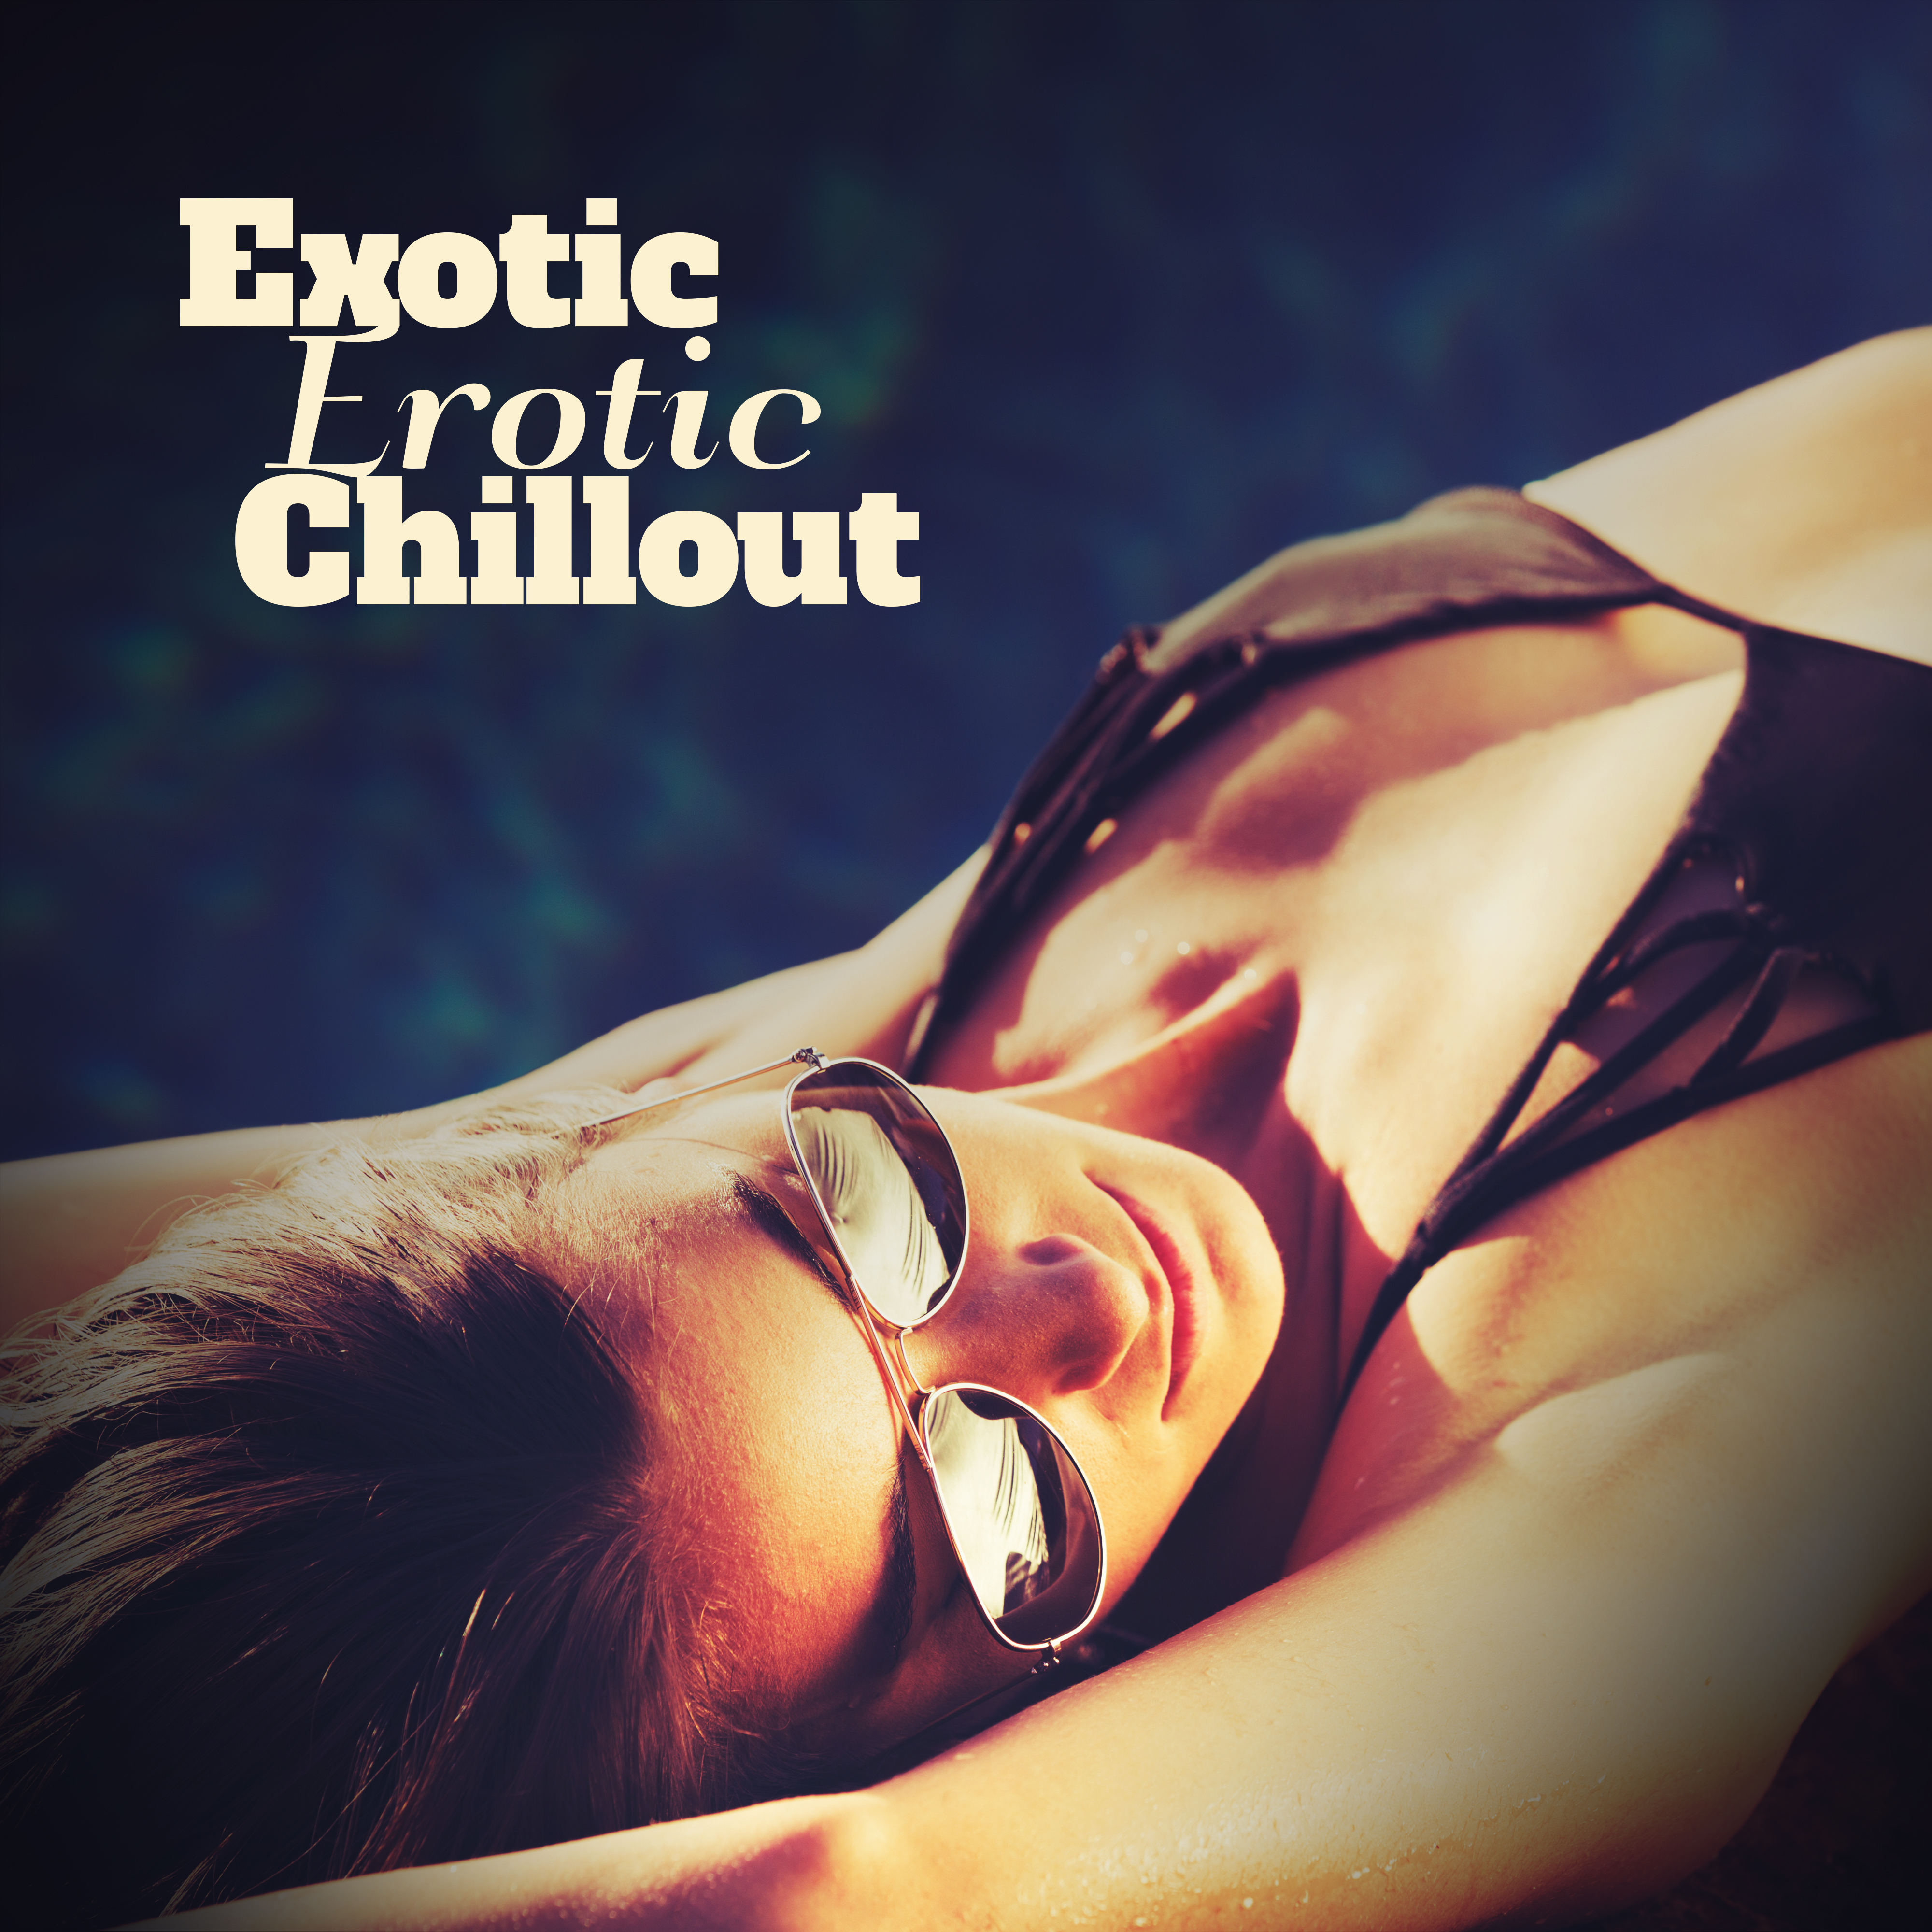 Exotic Erotic Chillout